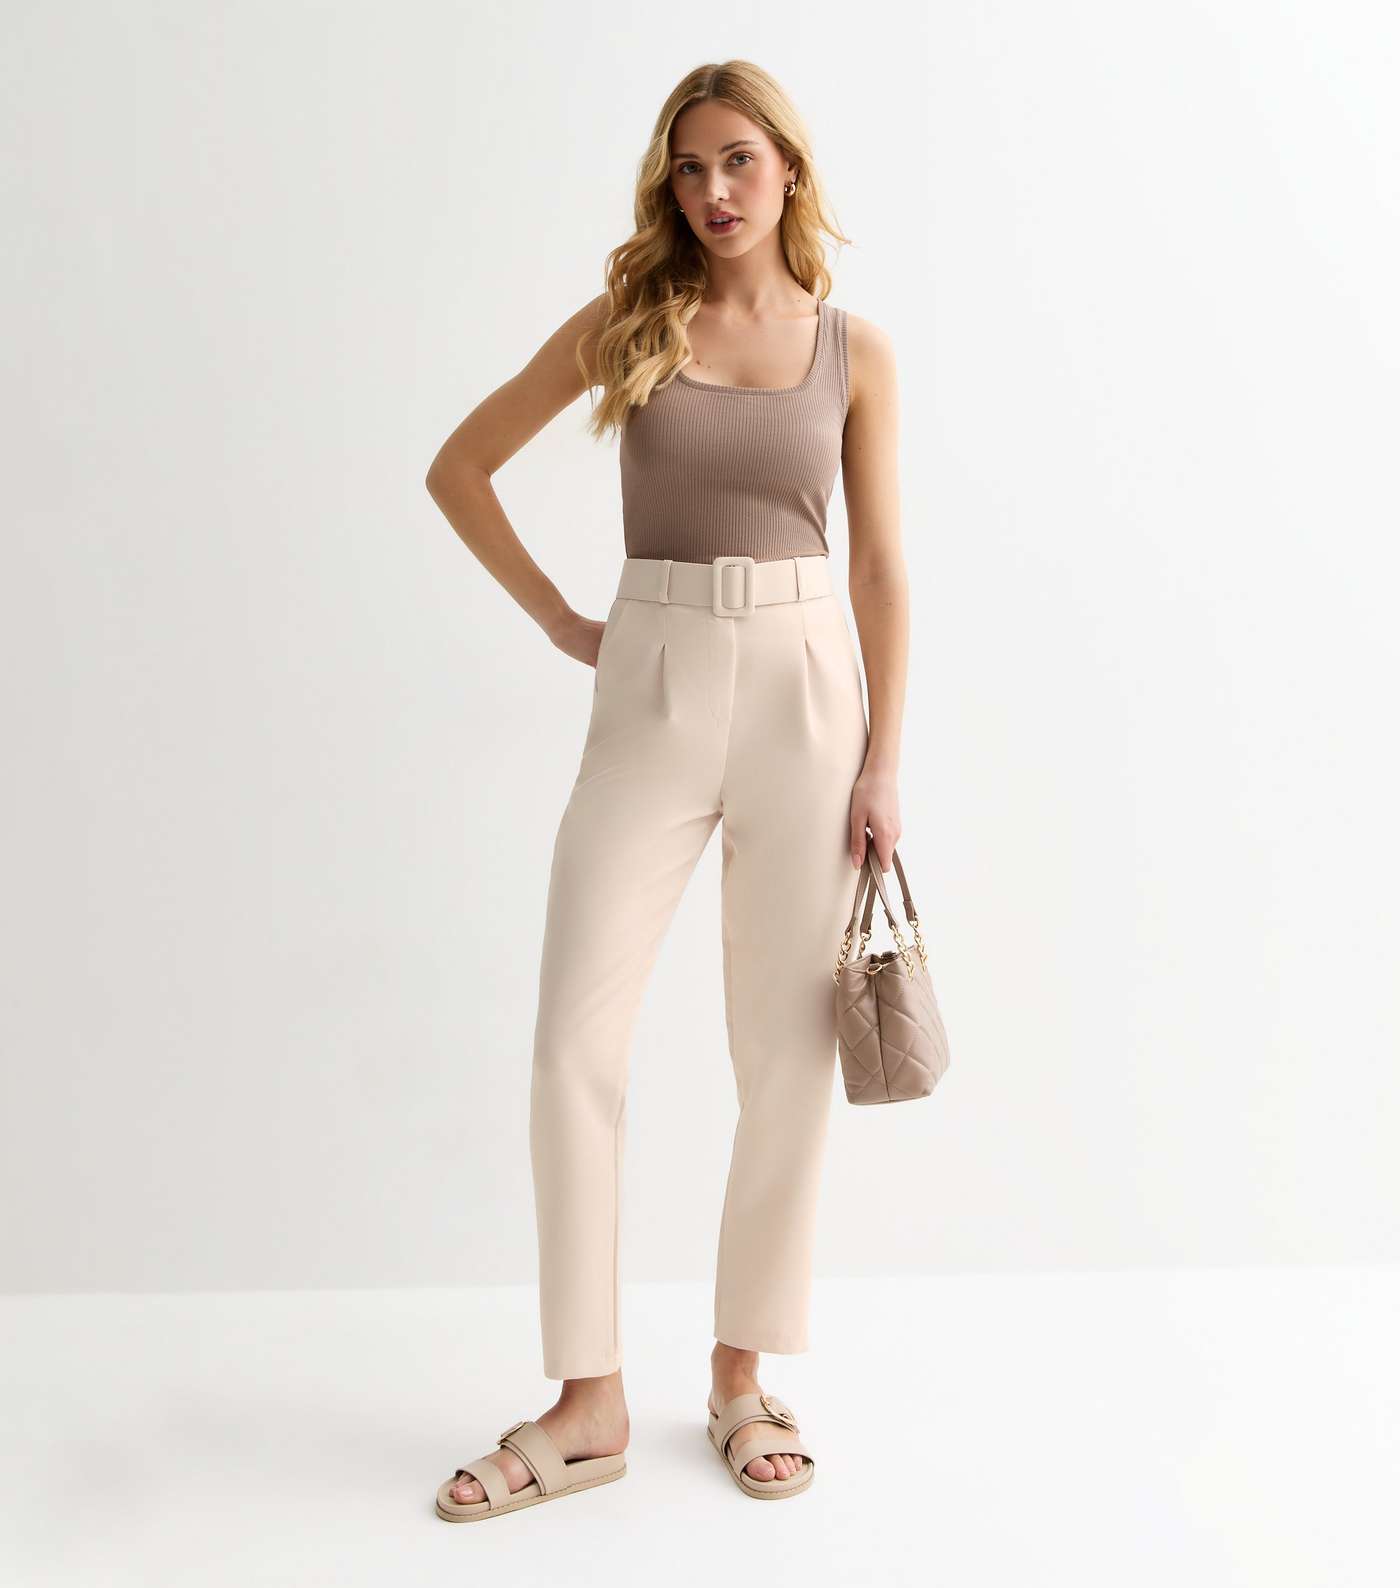 Gini London Cream Tapered Trousers Image 2